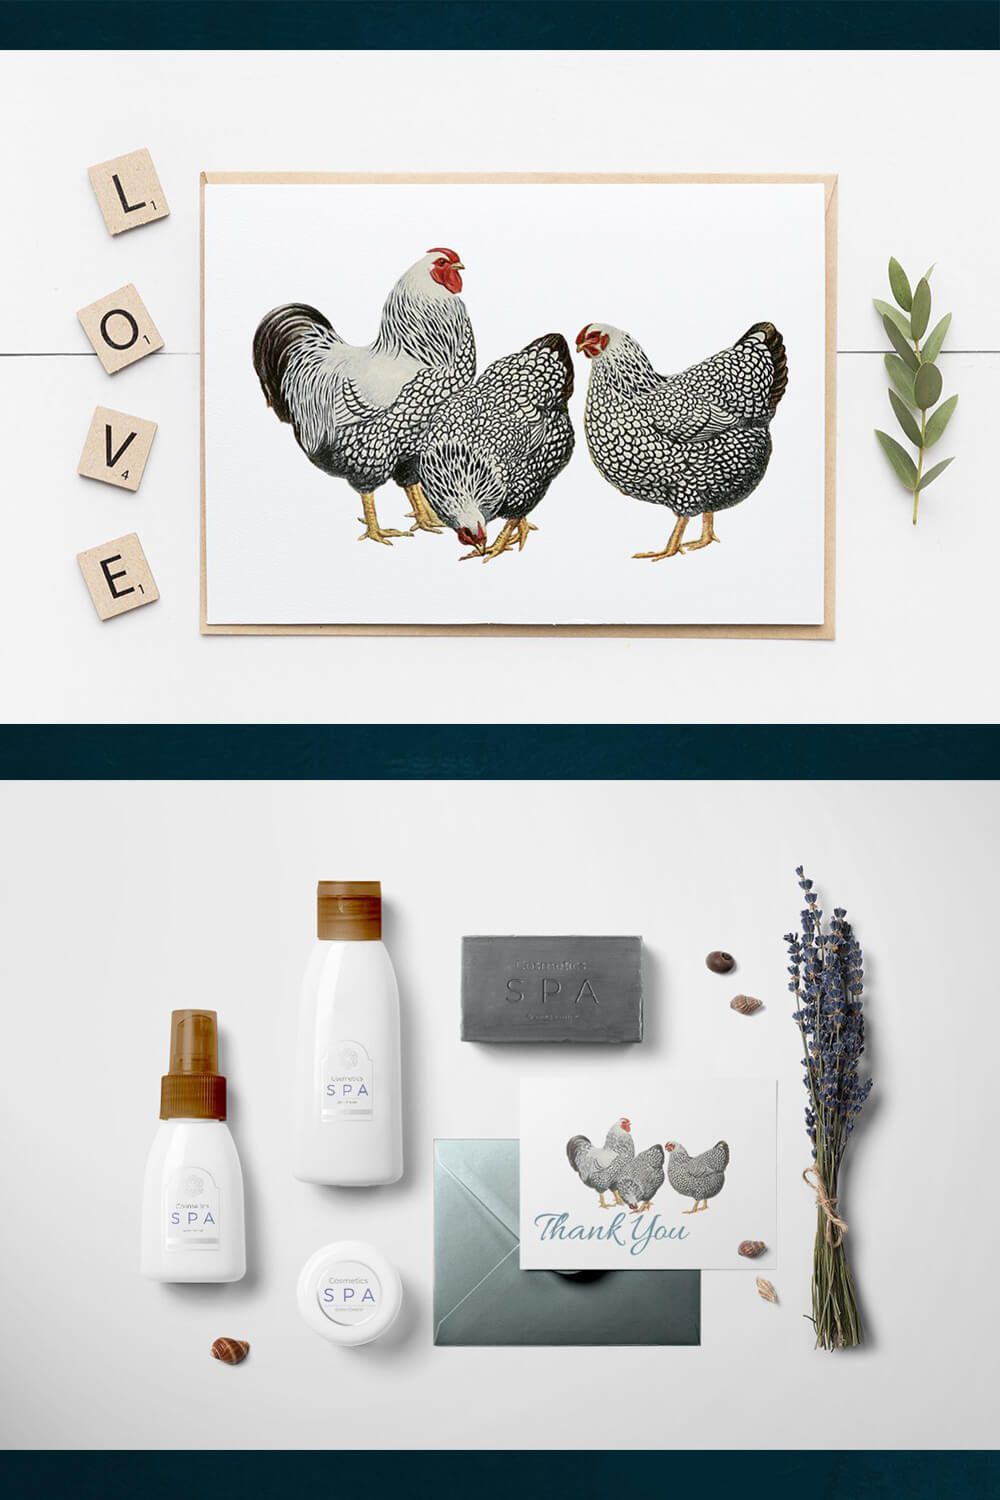 Two options for using the image of chickens in the picture and on the card.